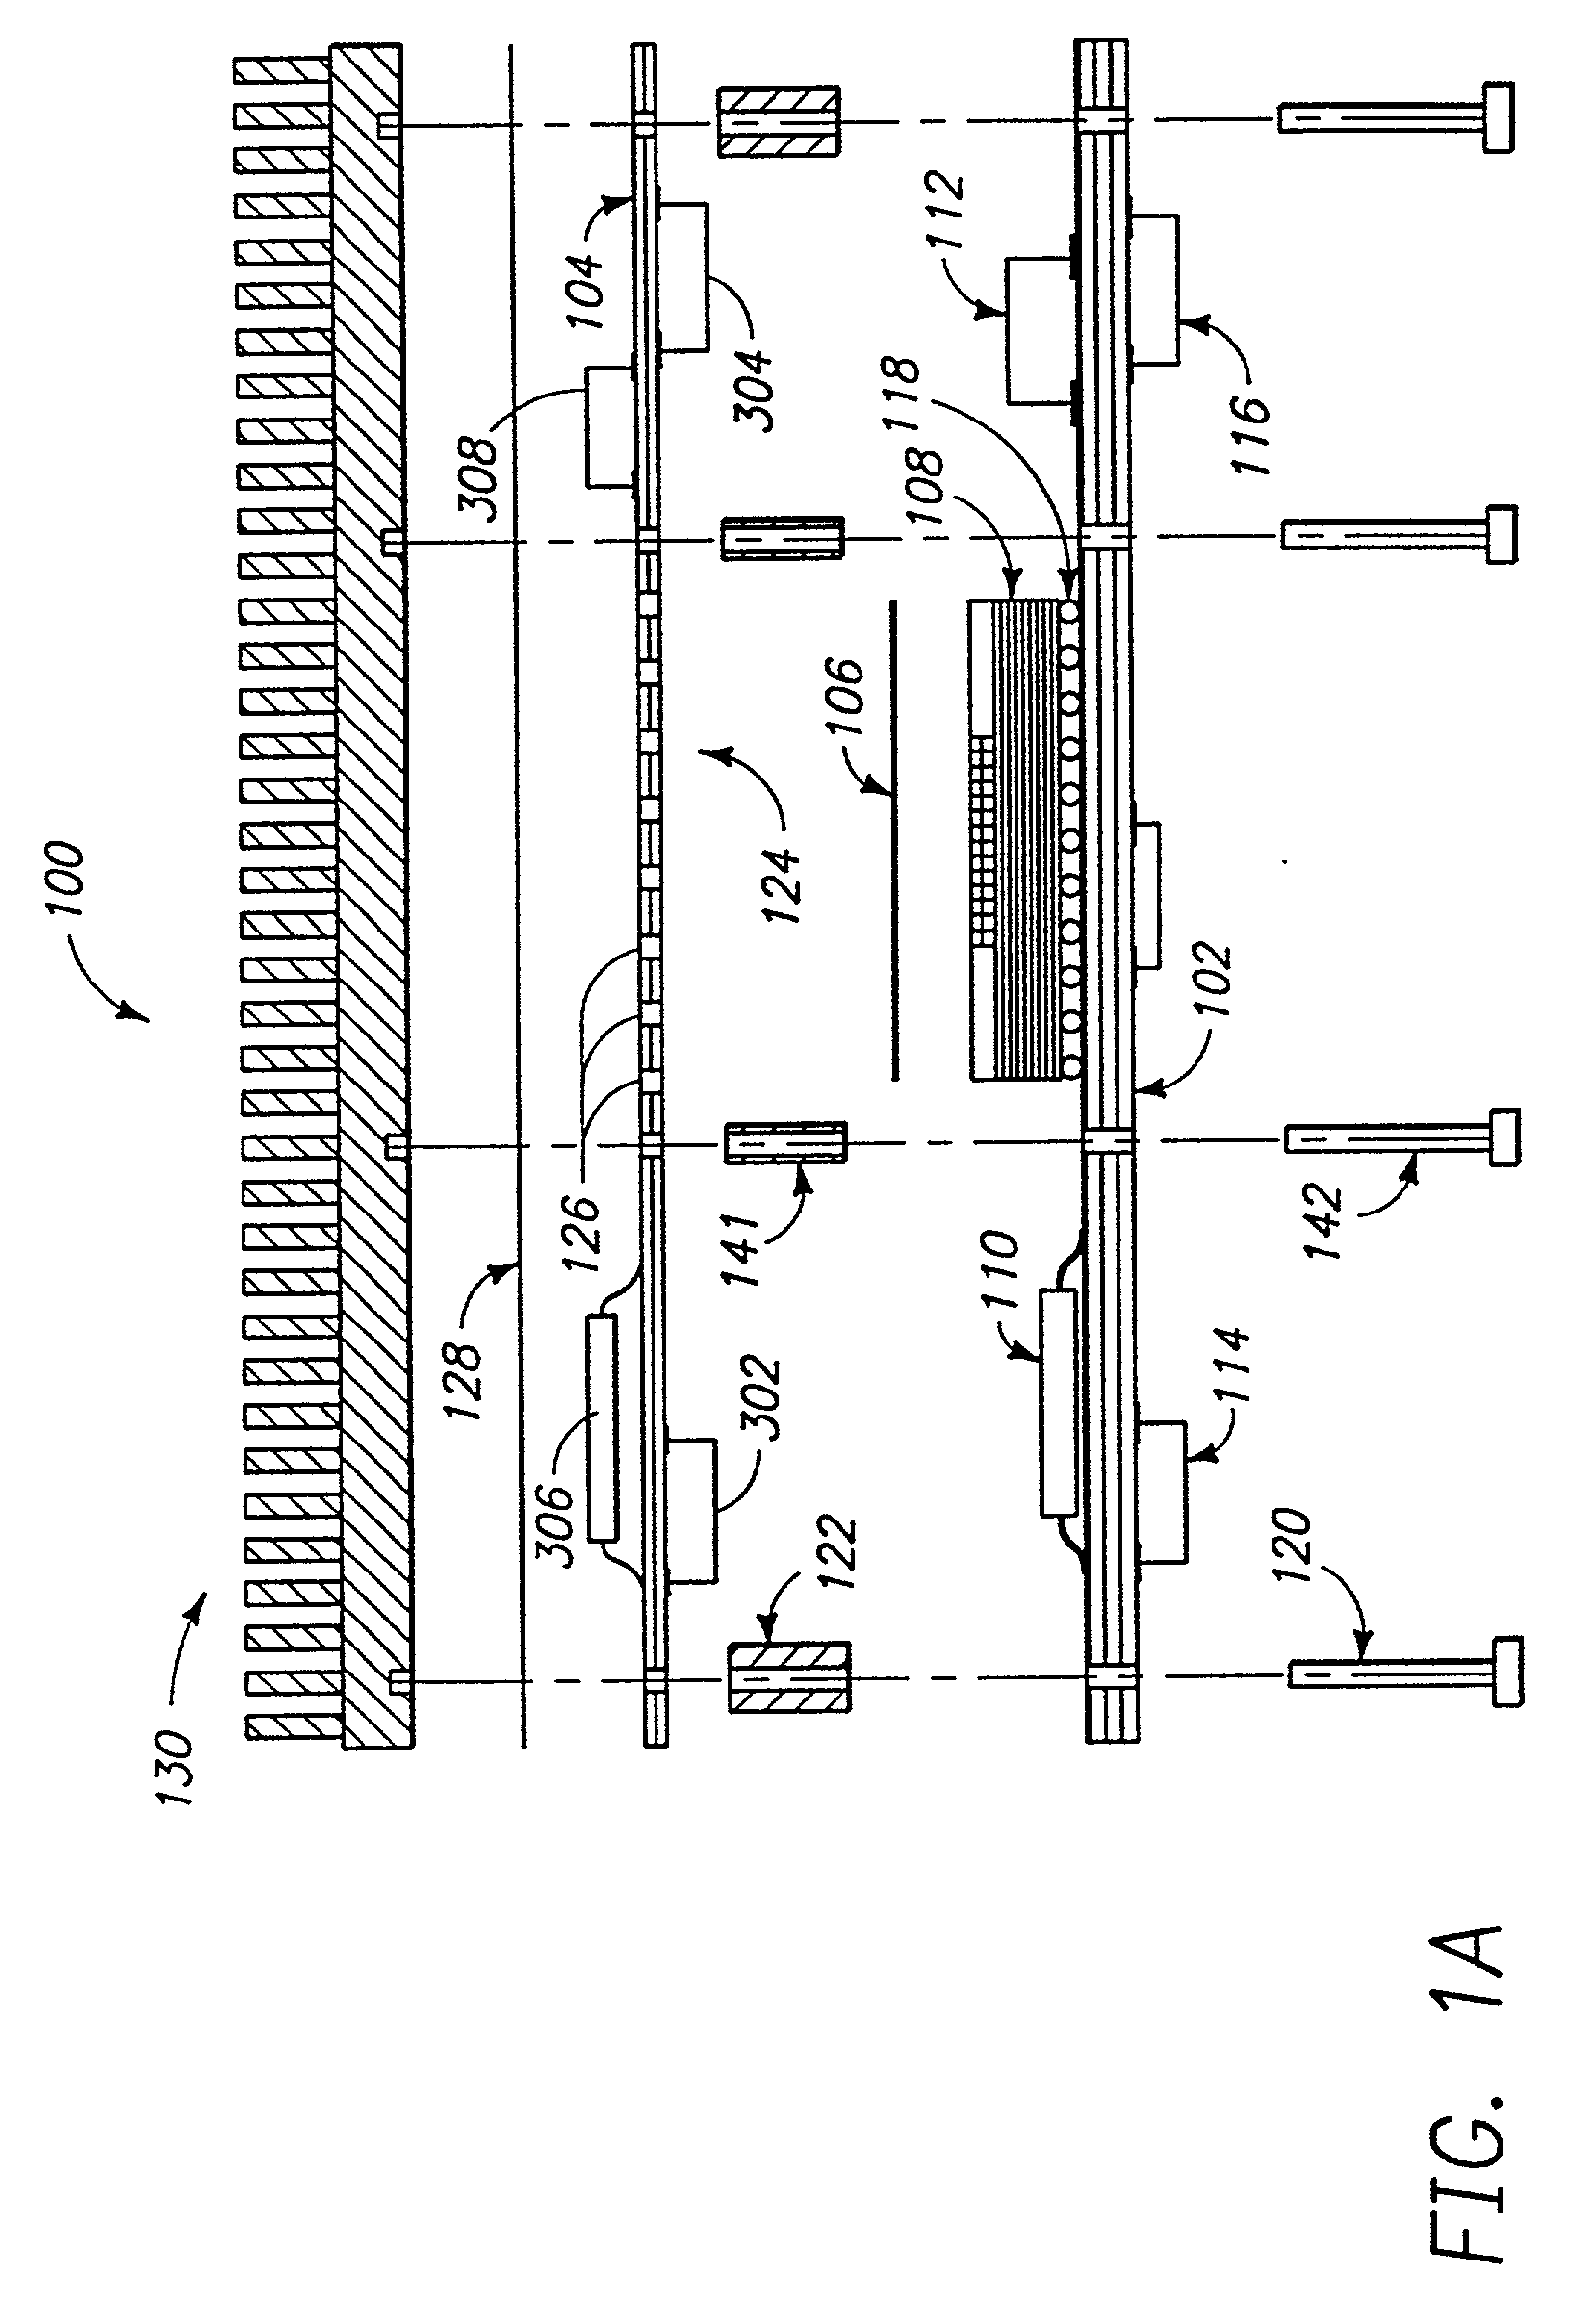 Inter-circuit encapsulated packaging